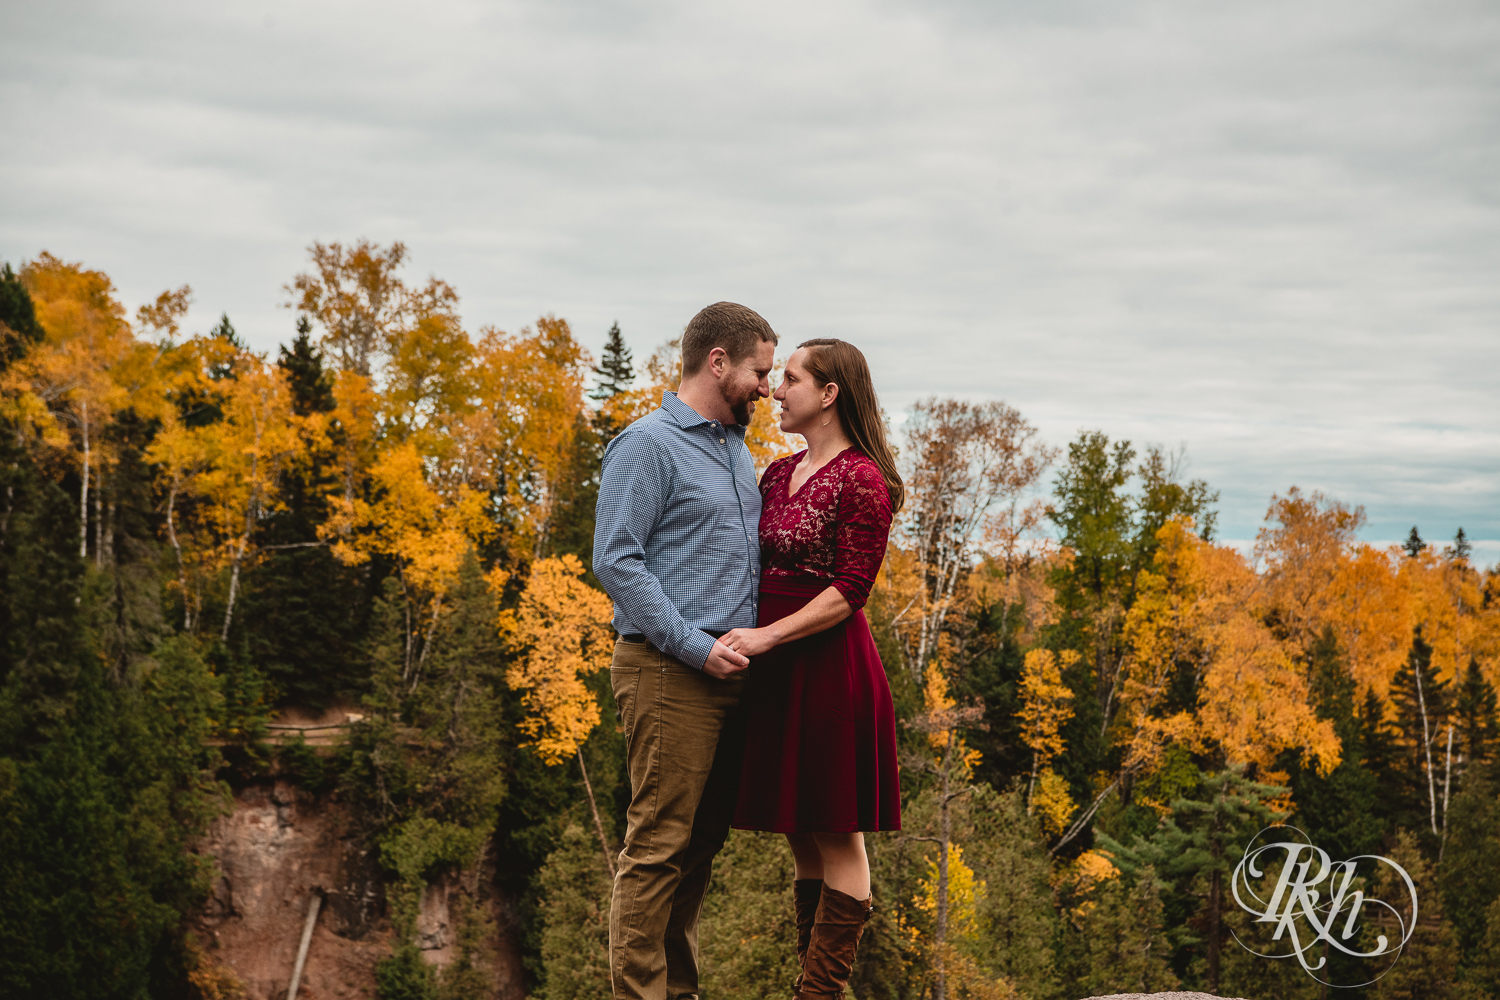 Man and woman in red dress smile in front of the fall colors in Gooseberry Falls in Two Harbors, Minnesota.